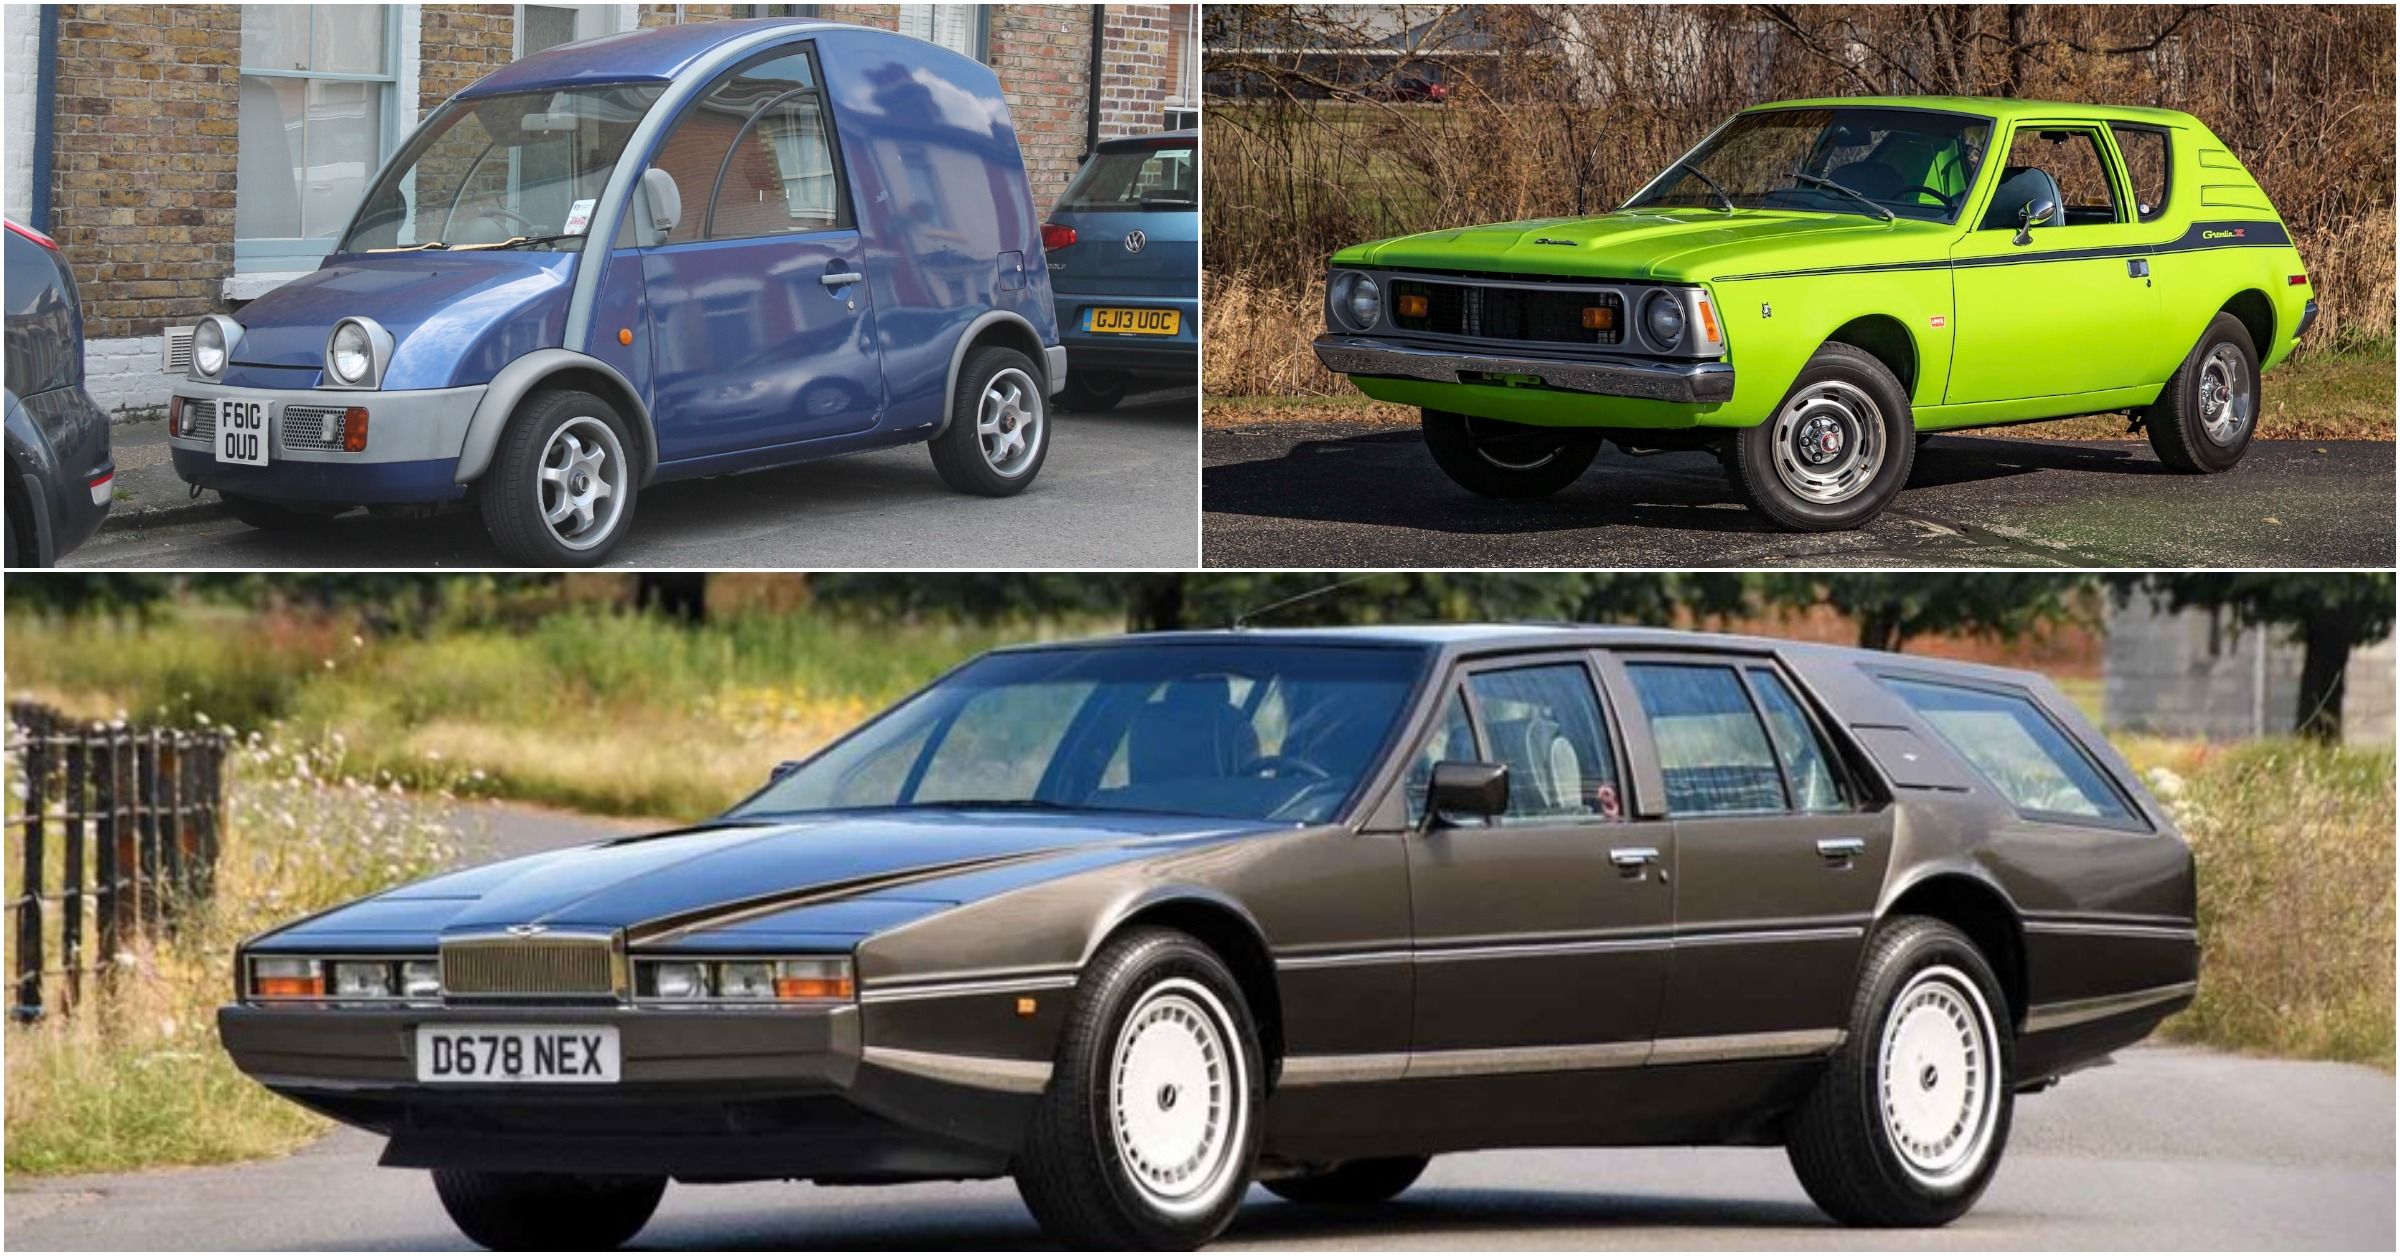 14 Ugliest Cars of the '80s (1 That's Pretty Sick) | HotCars